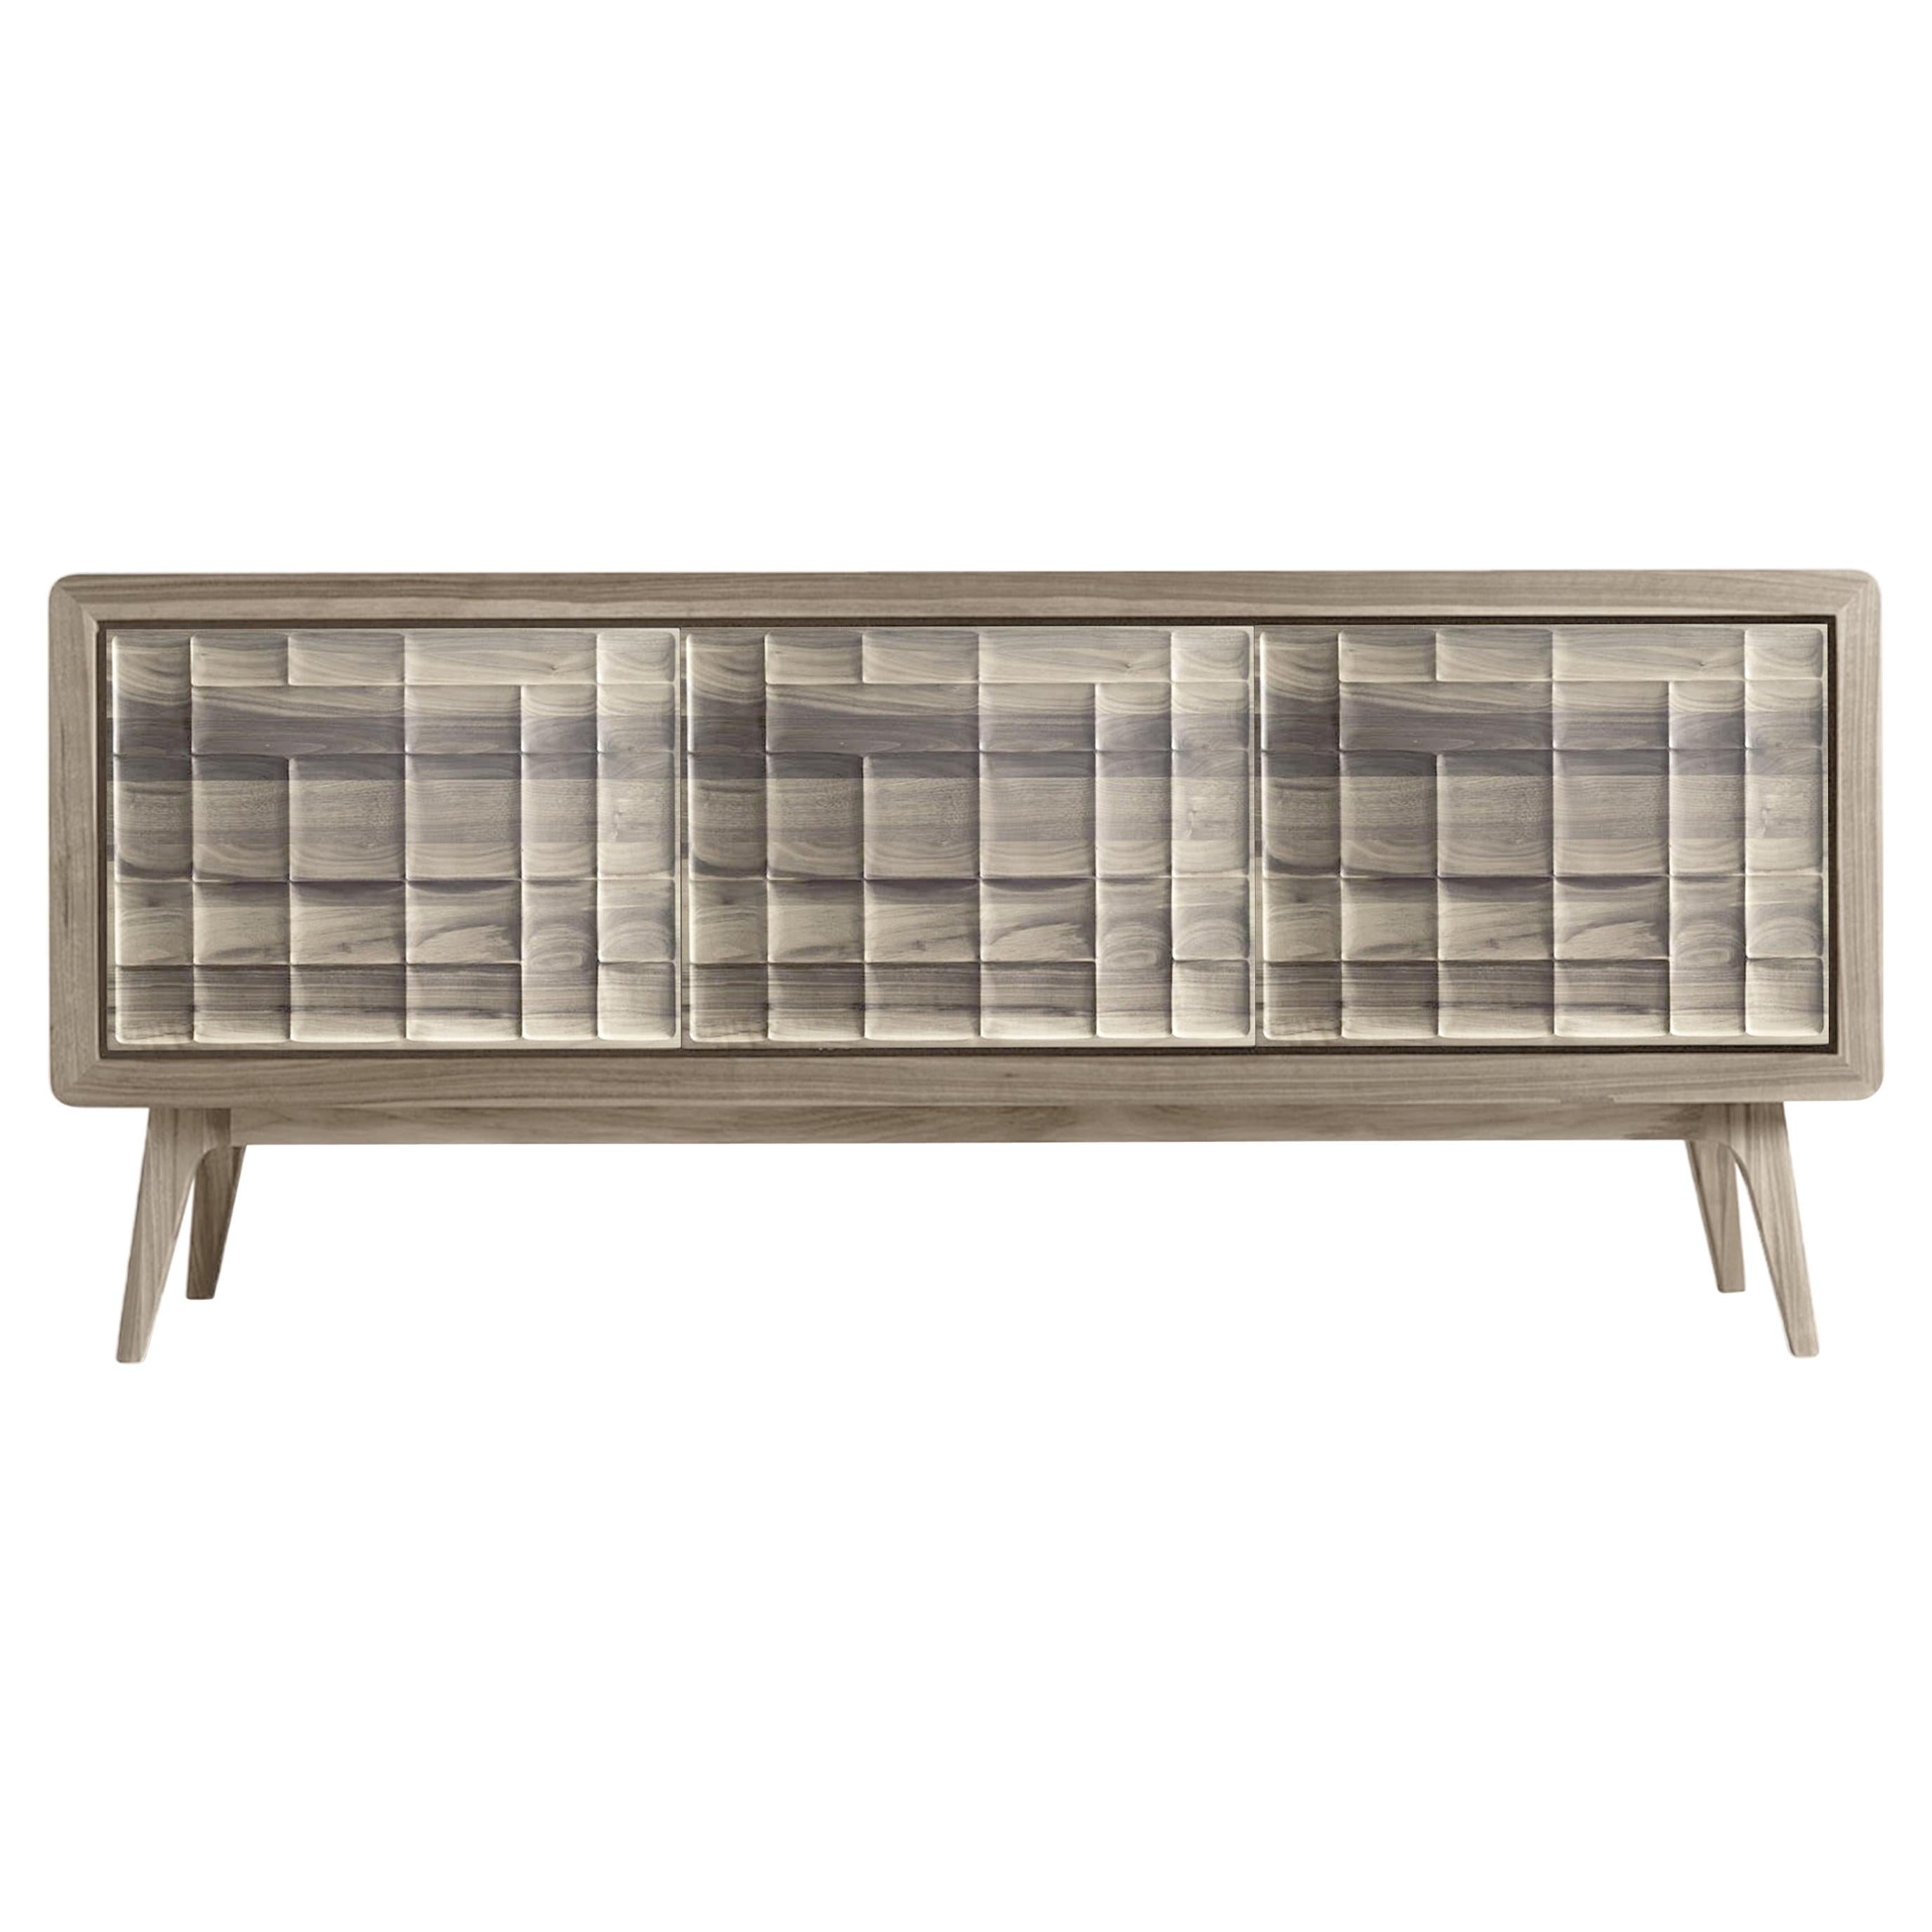 Artes Scacco Solid Wood Sideboard, Walnut Natural Grey Finish, Contemporary